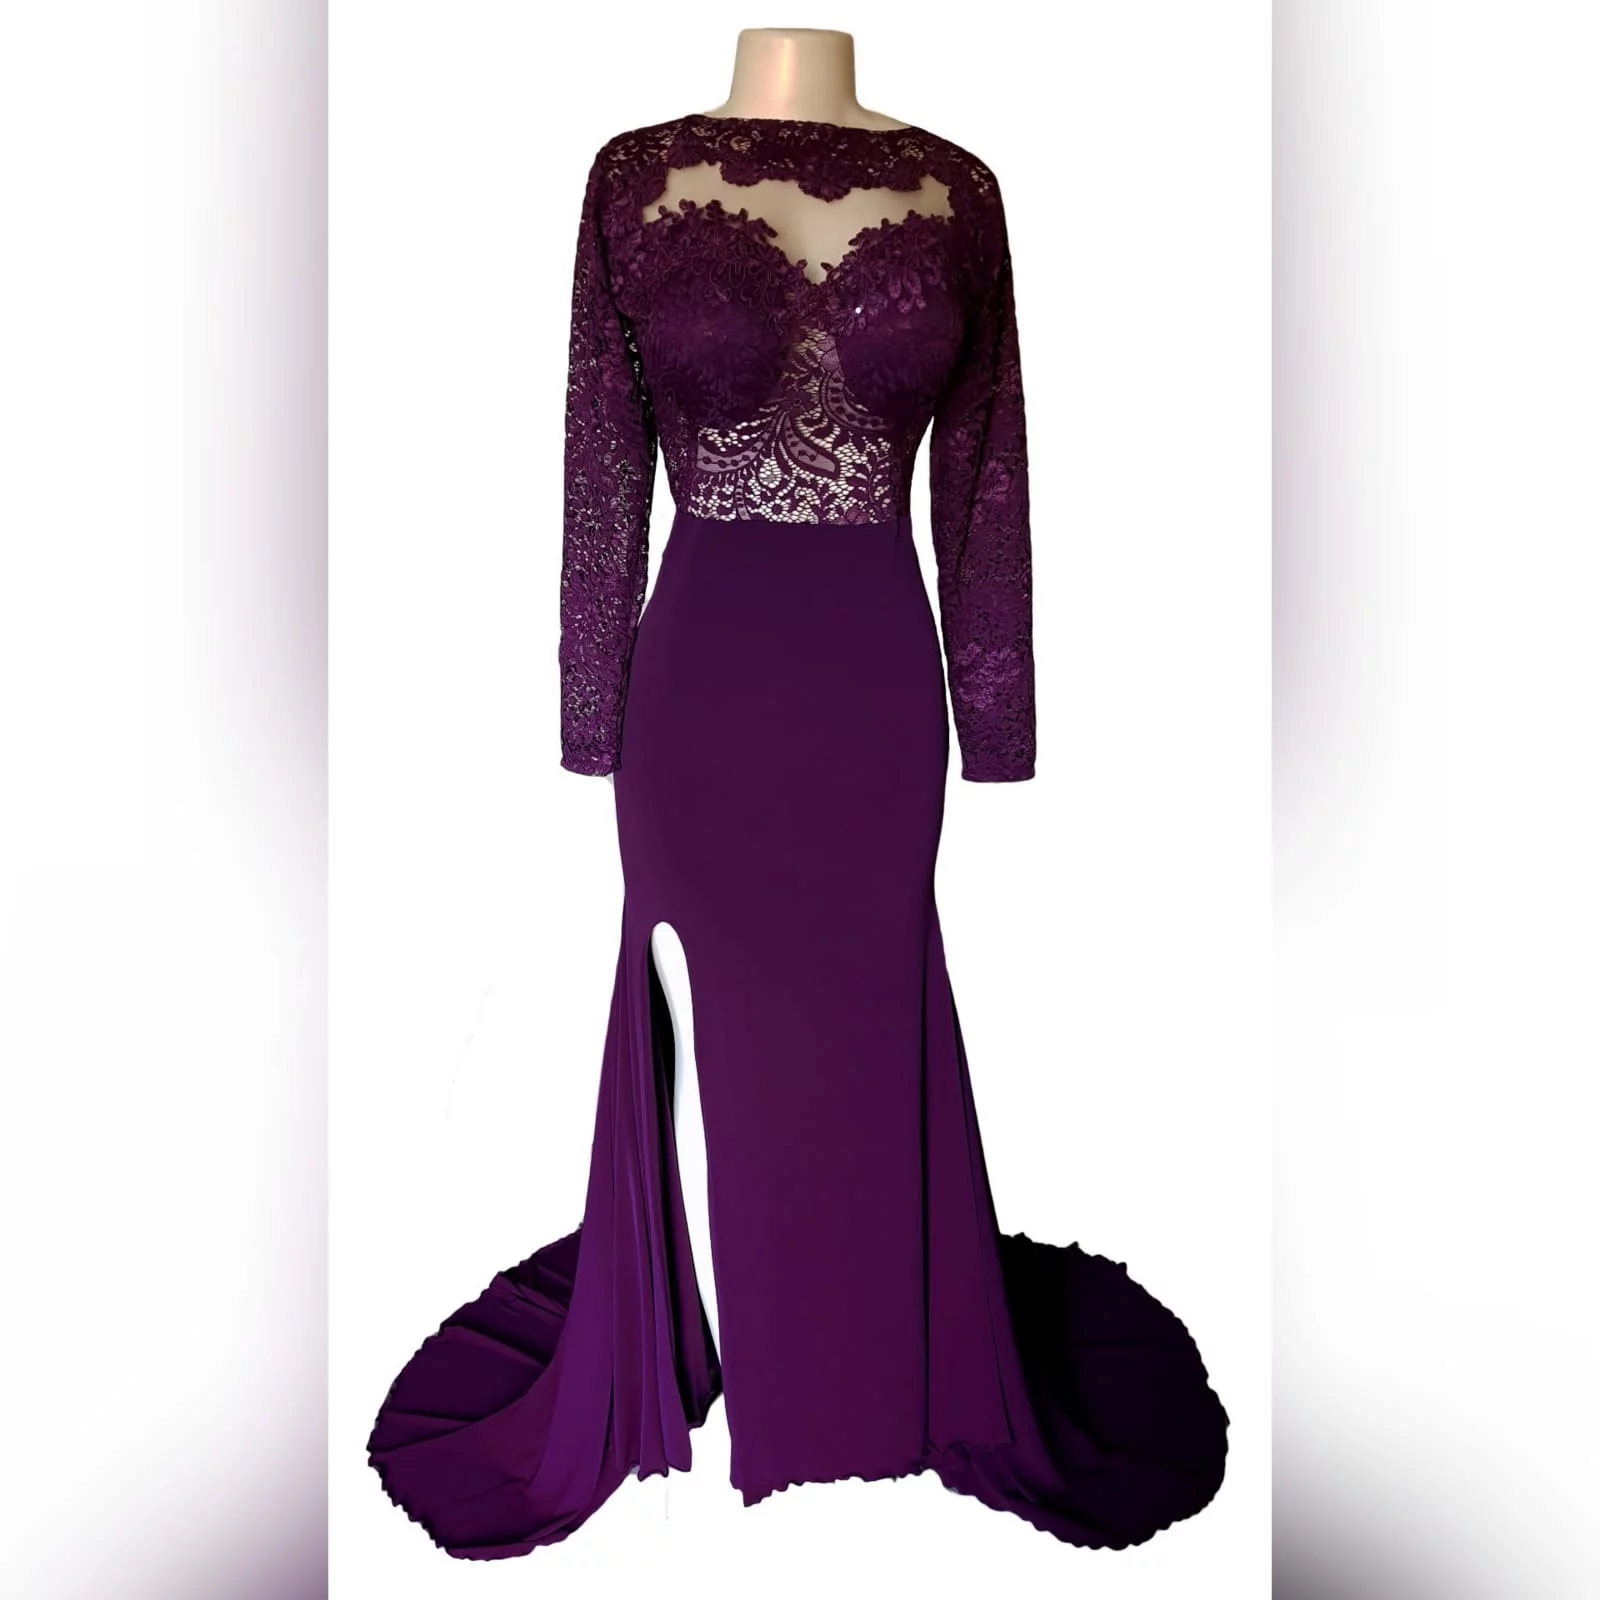 Plum lace bodice soft mermaid matric dance dress 3 plum lace bodice, soft mermaid matric dance dress with a low open rounded open back and hip lace design. With long lace sleeves and a long train.